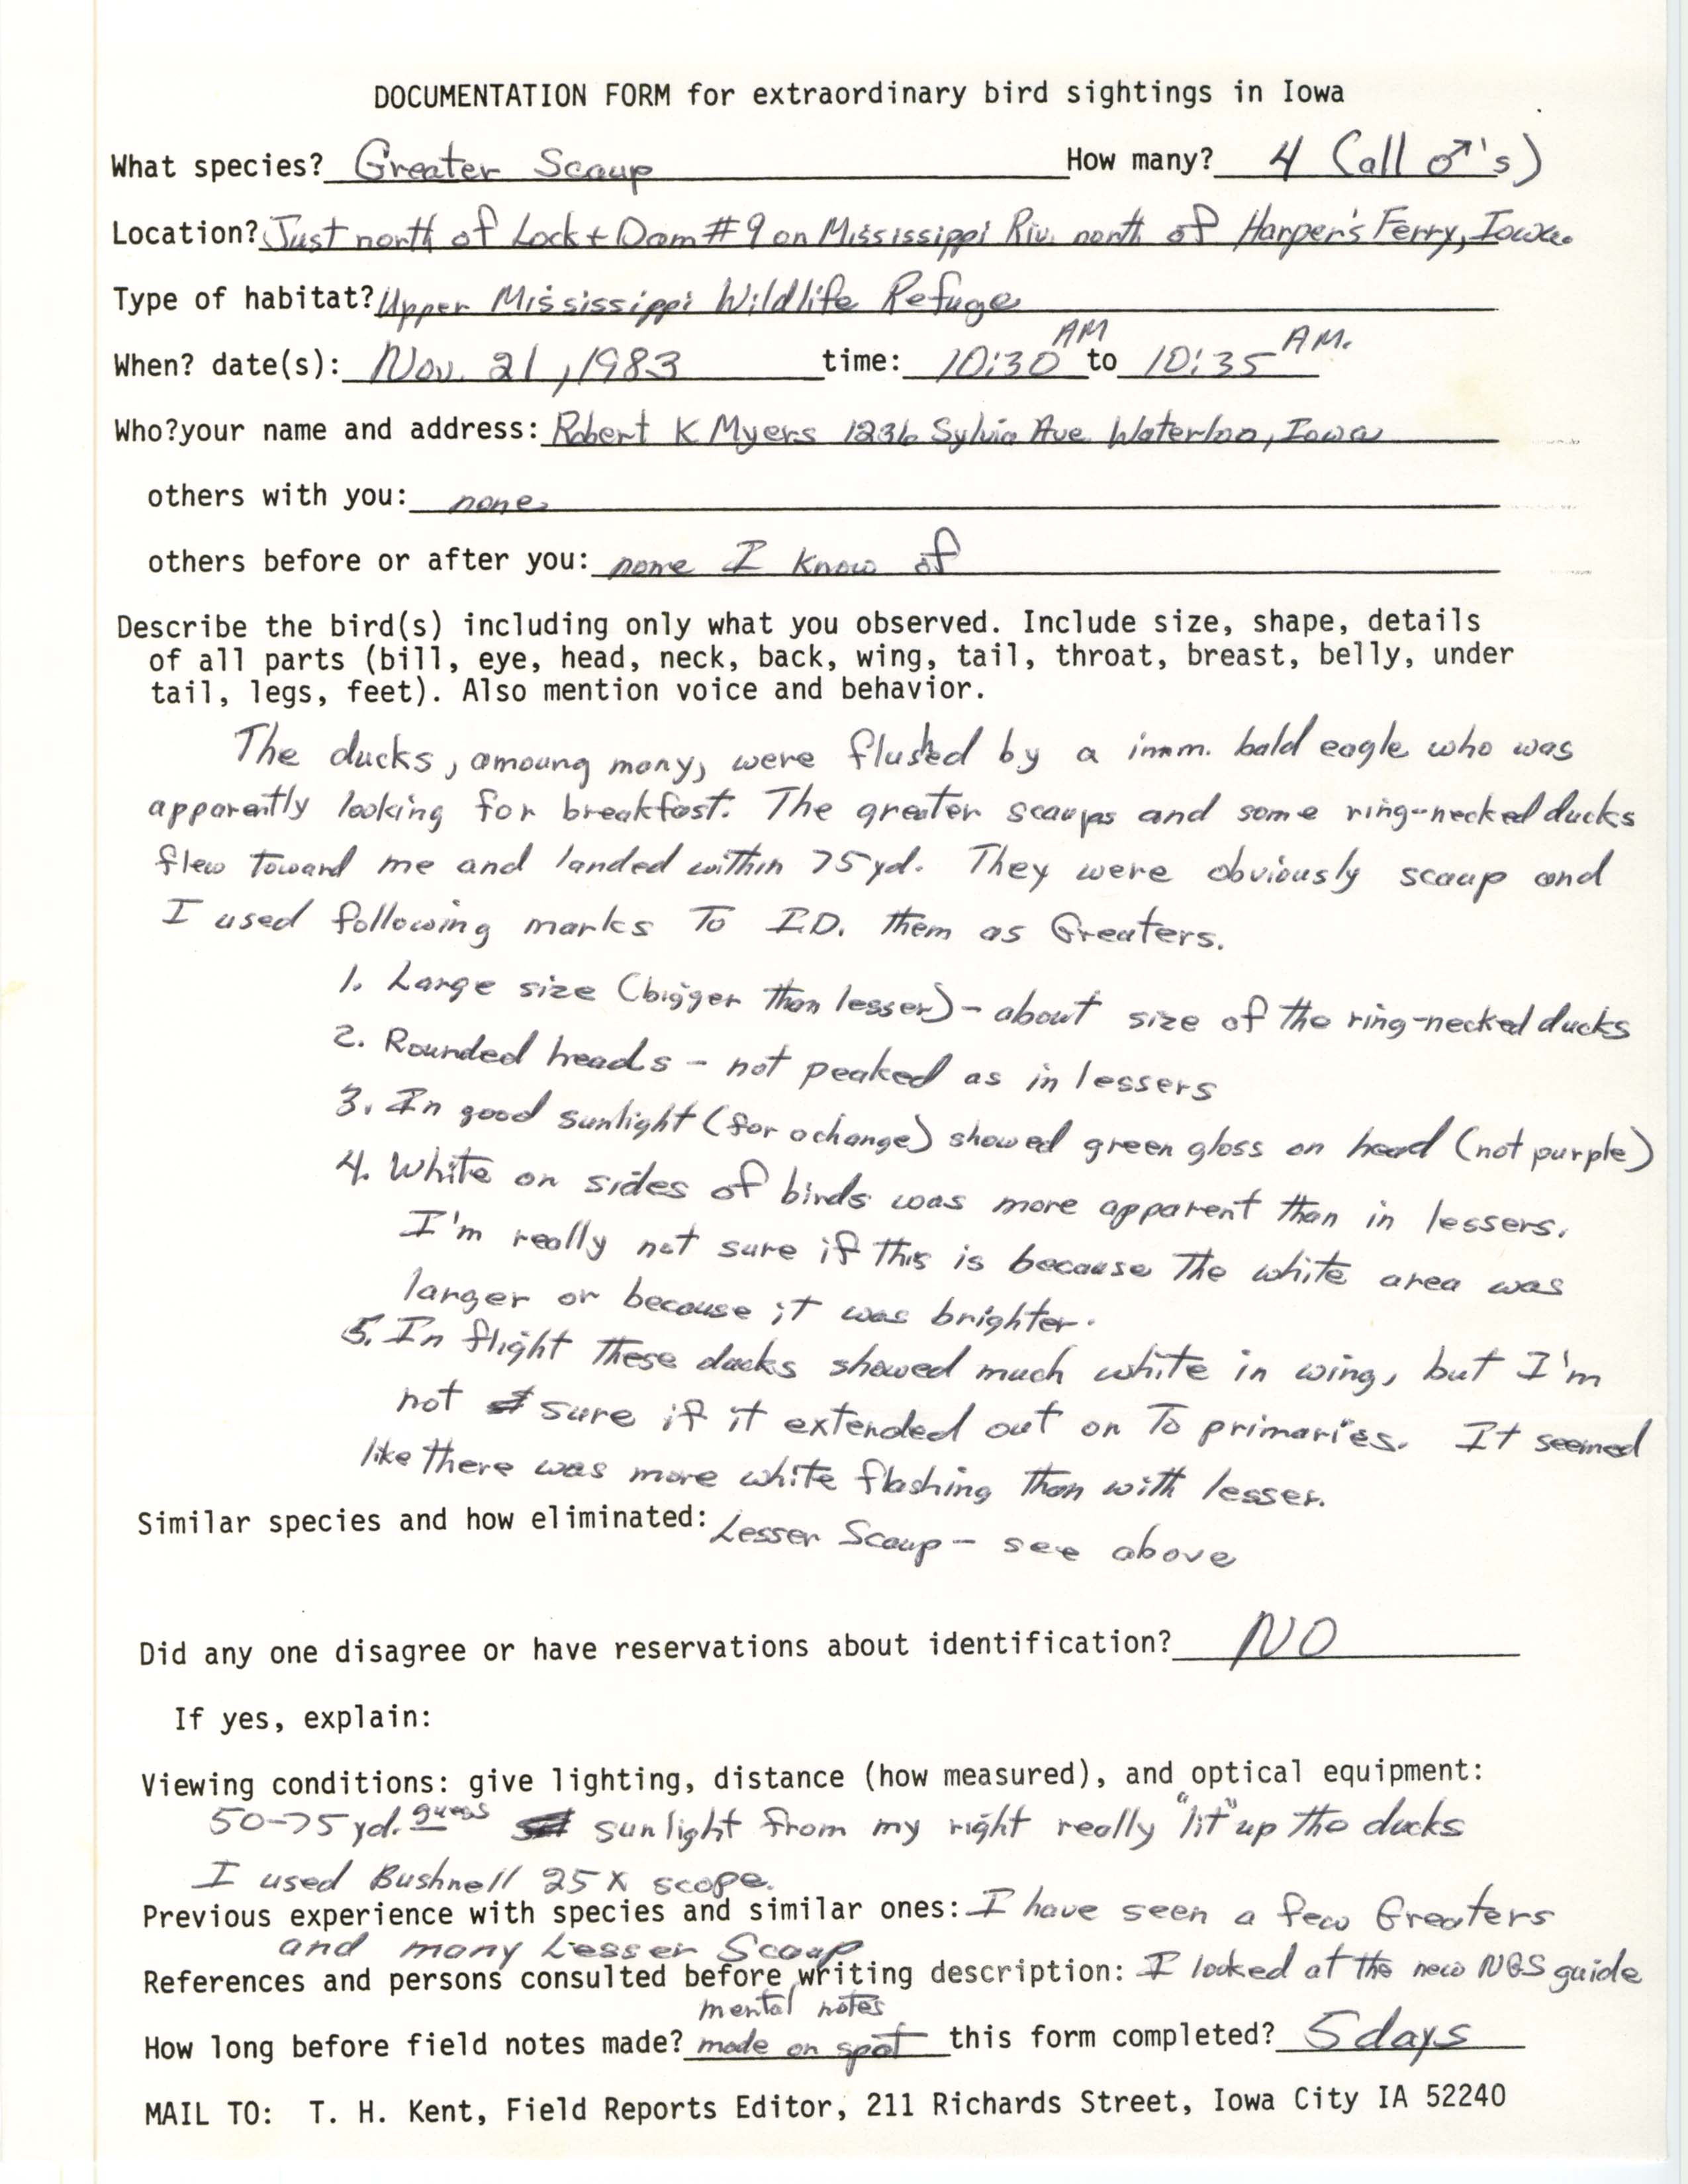 Rare bird documentation form for Greater Scaup at Lock and Dam 9, 1983